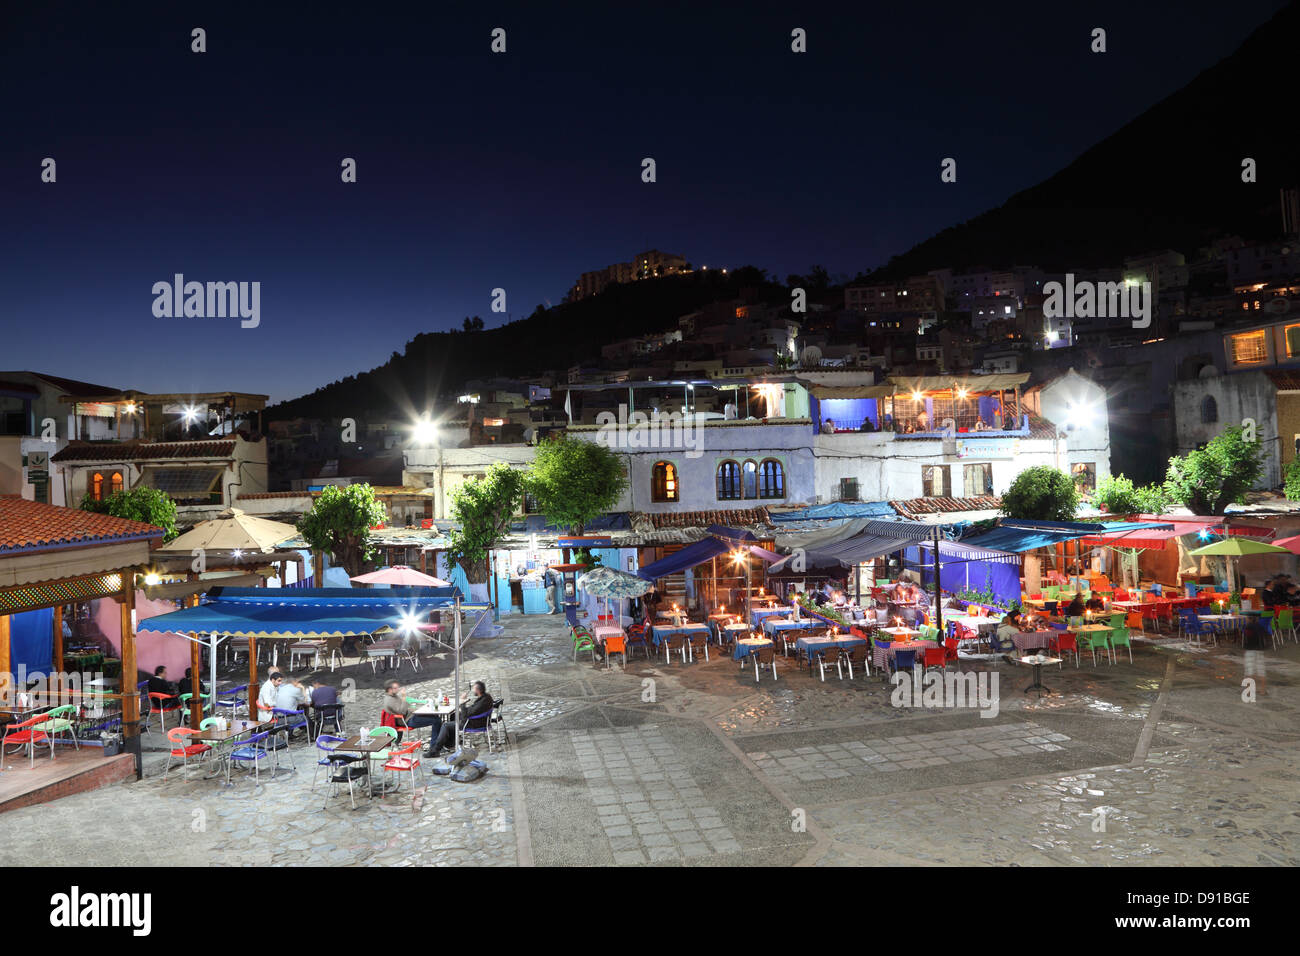 Square in the medina of Chefchaouen at night, Morocco Stock Photo